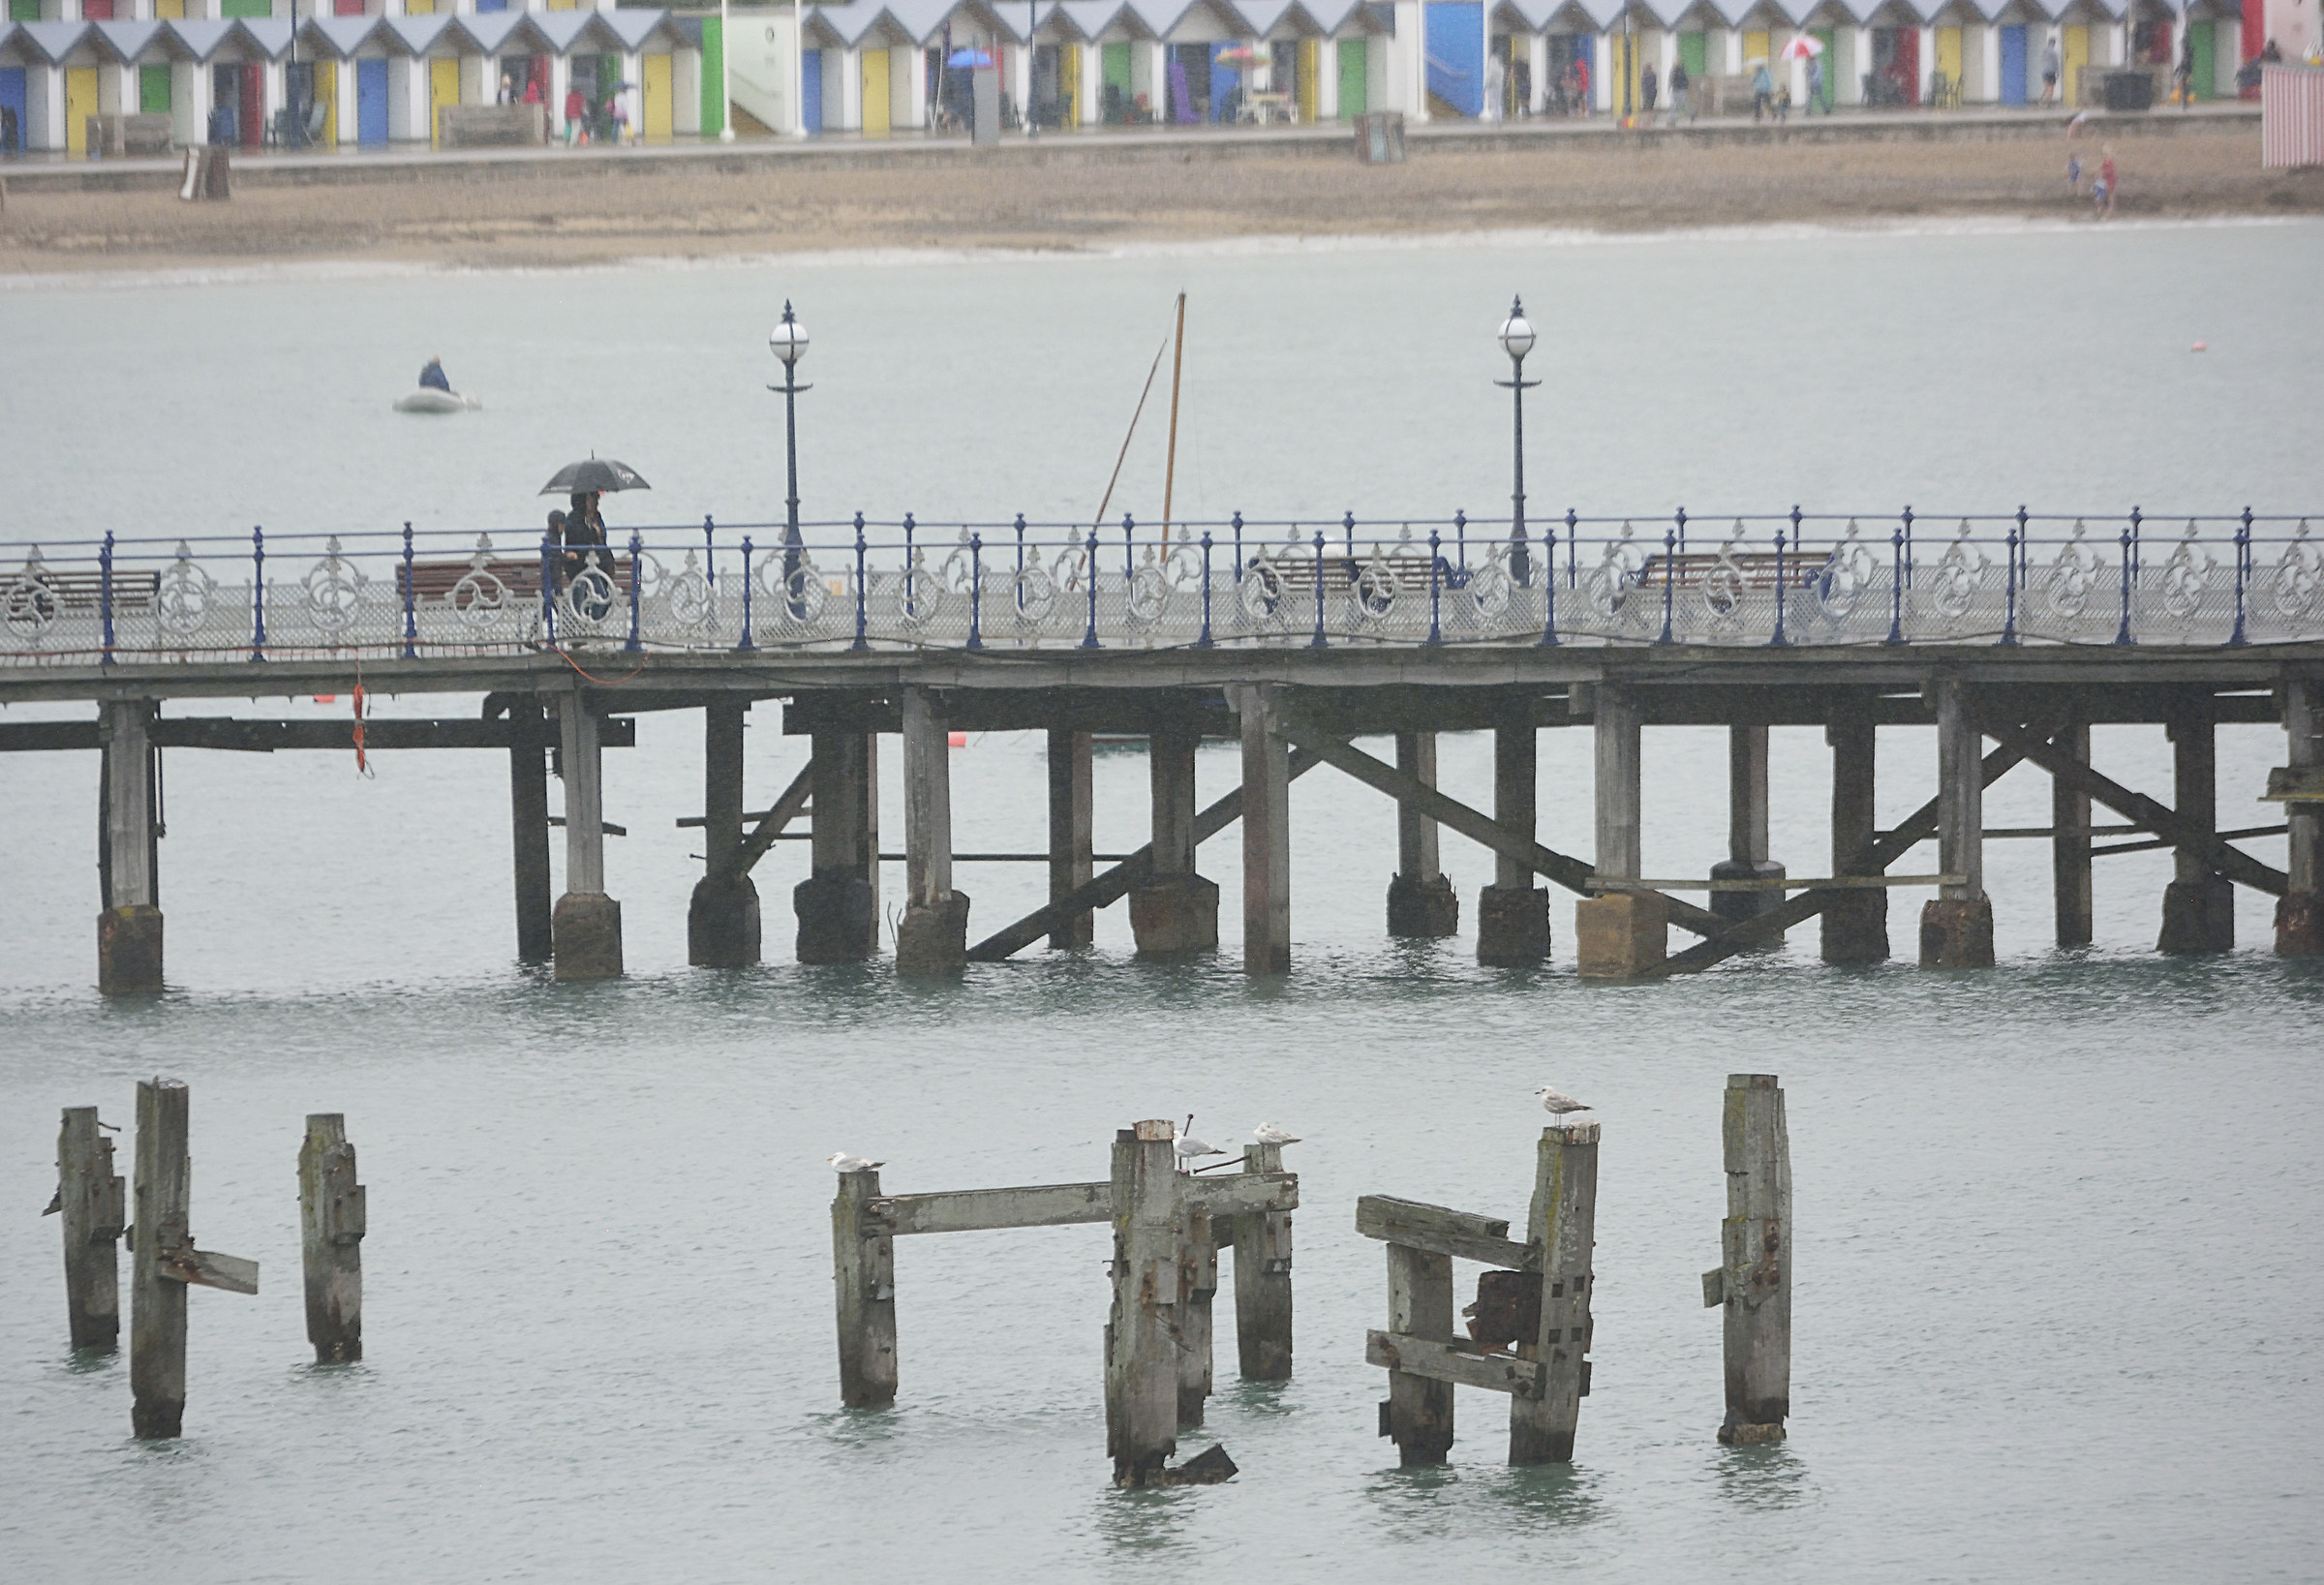 Strolling On Swanage Pier, in the Pouring Rain...